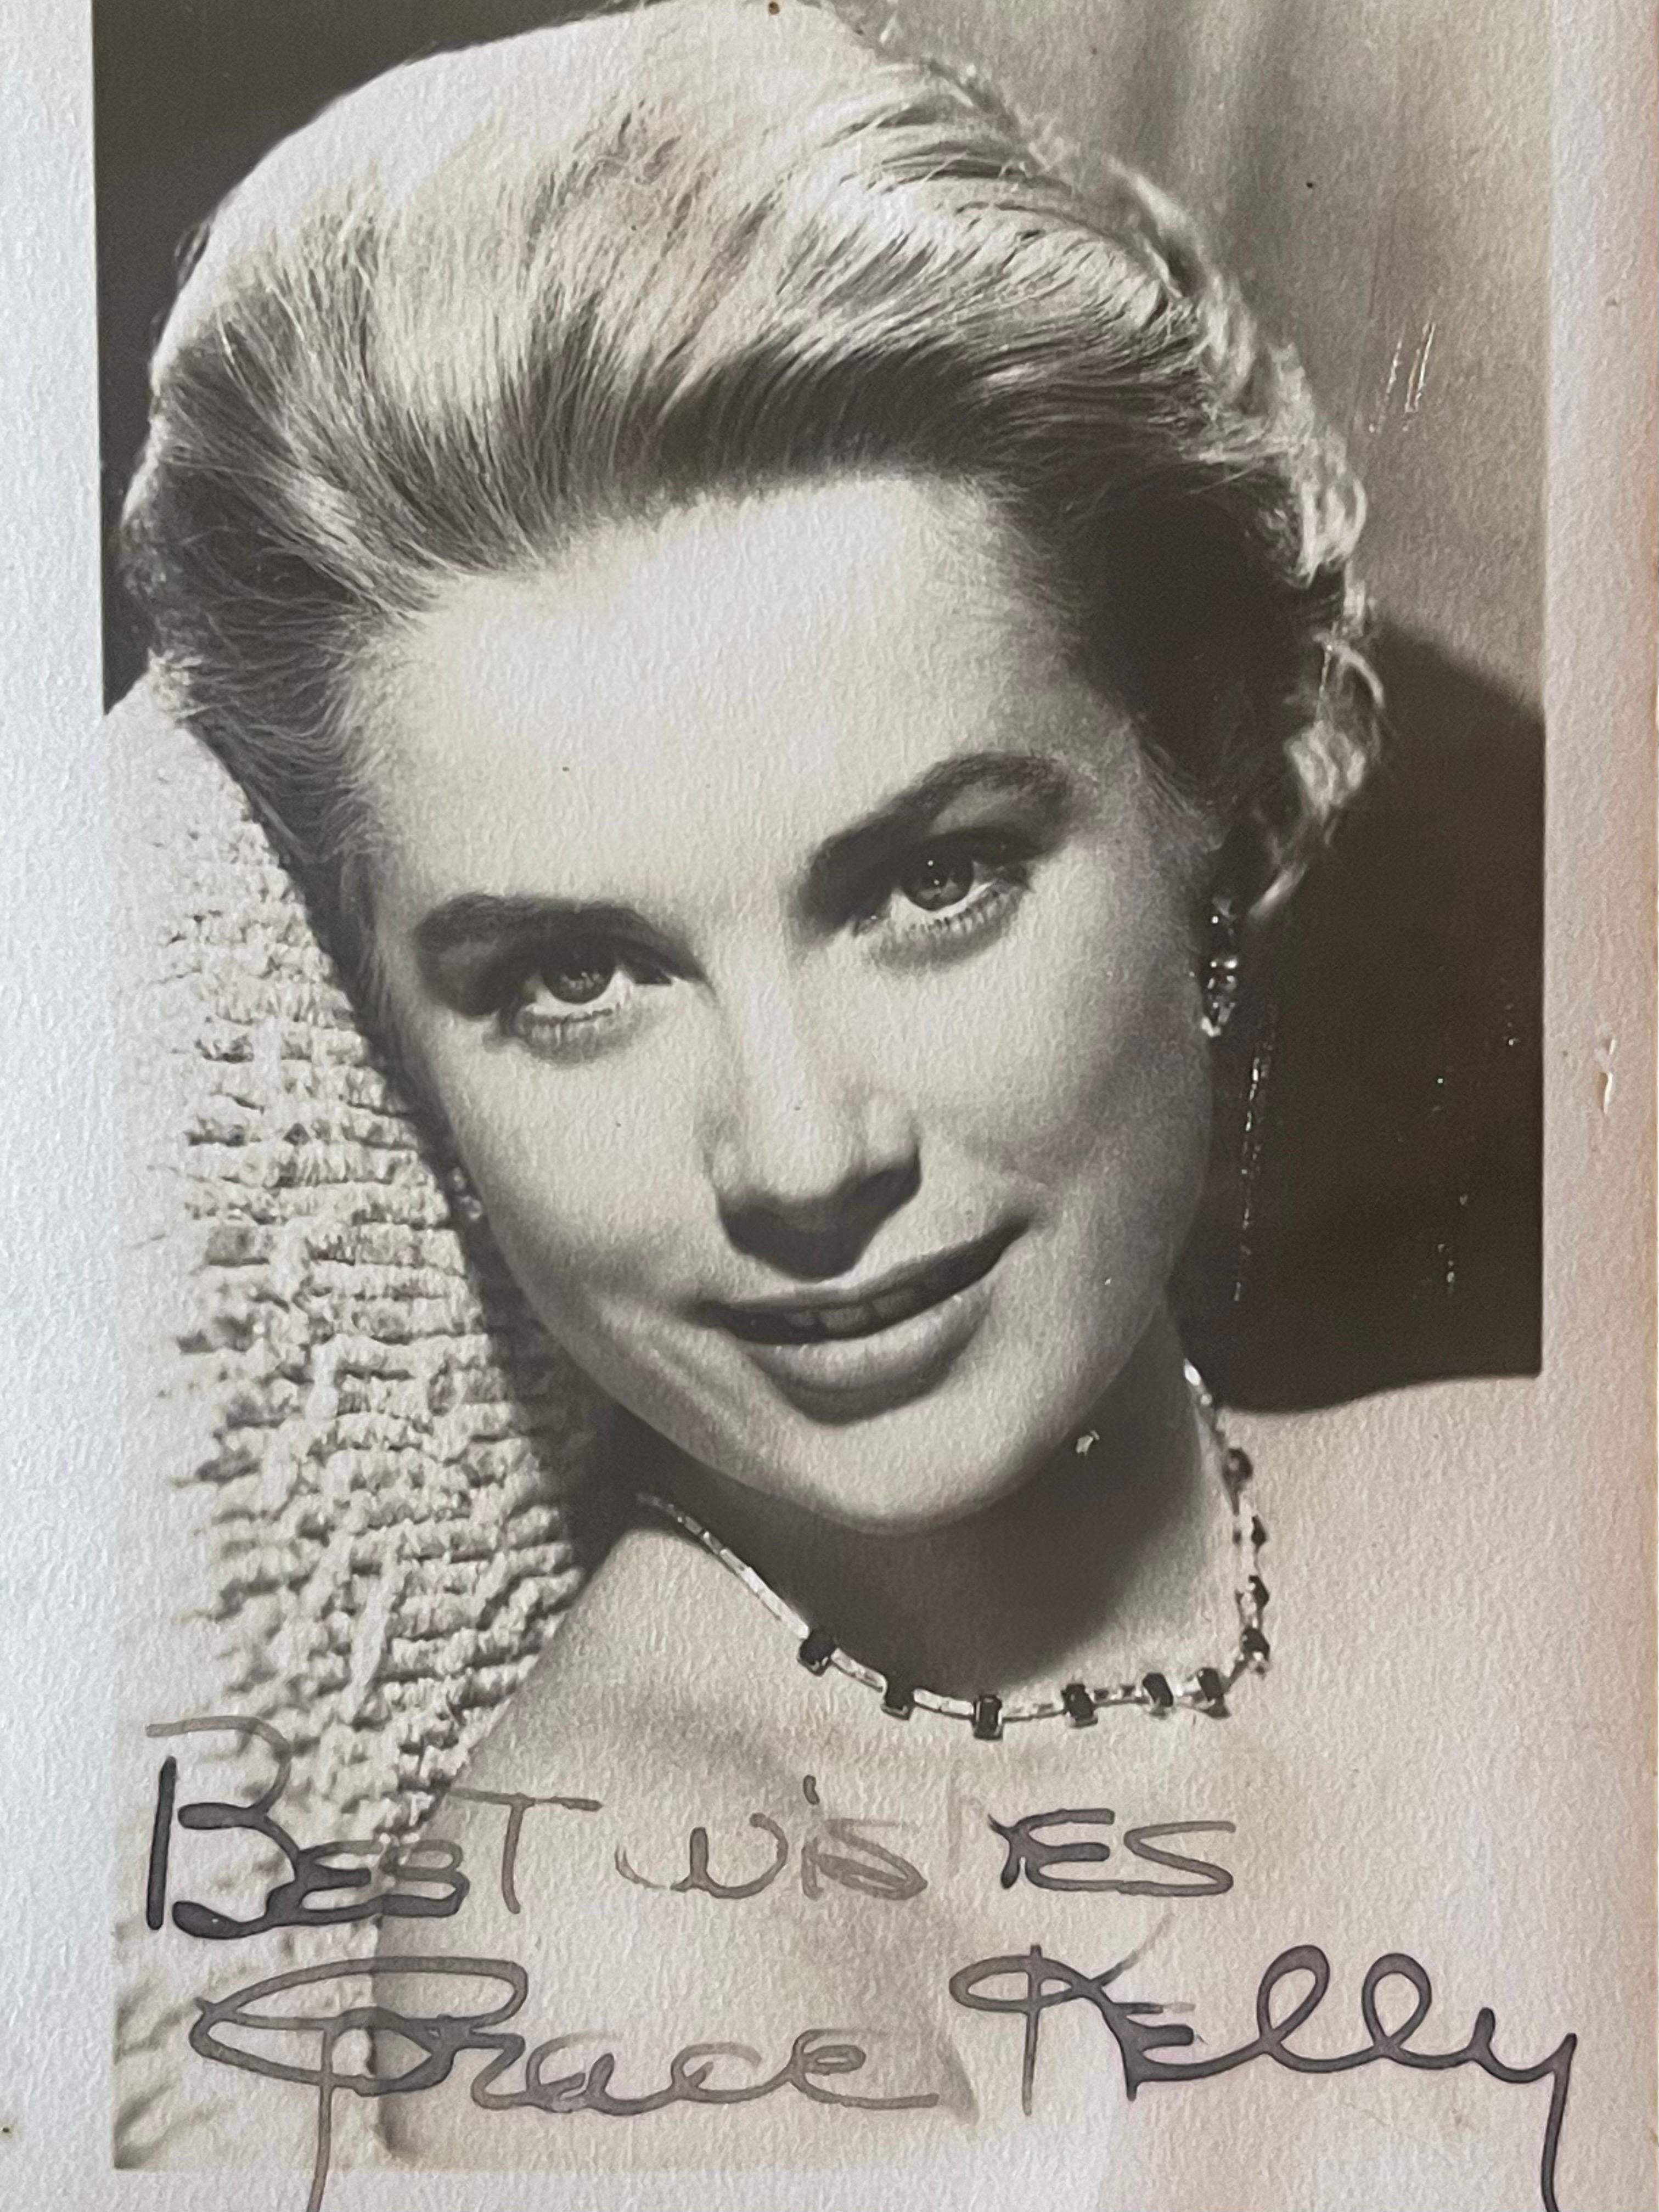 A rare vintage Grace Kelly signed photograph, circa 1950s.  The photo has a mat finish and is signed in black pen; it reads 